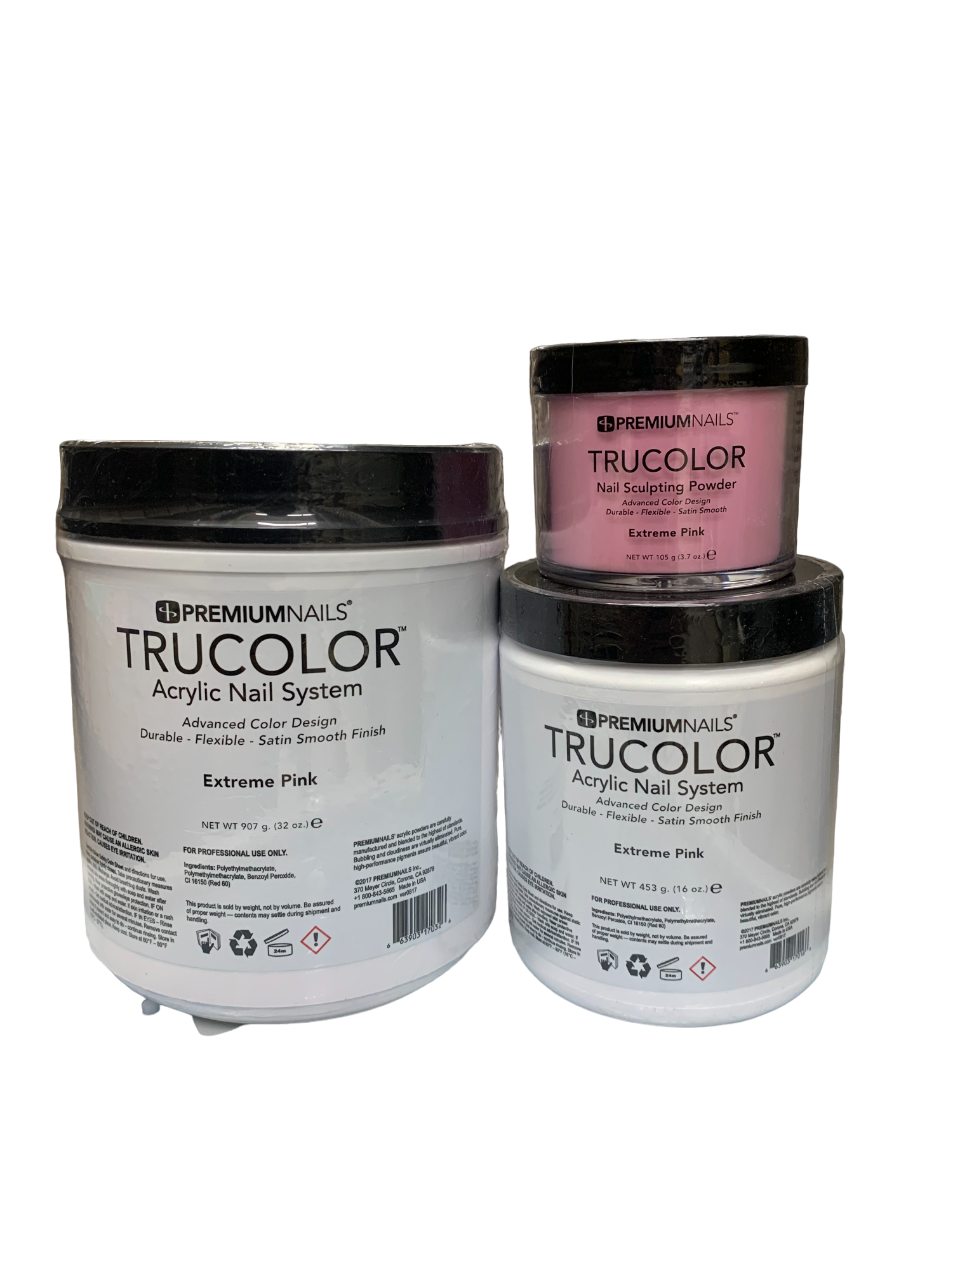 Premiumnails Trucolor Acrylic Powder - TCEP - Extreme Pink